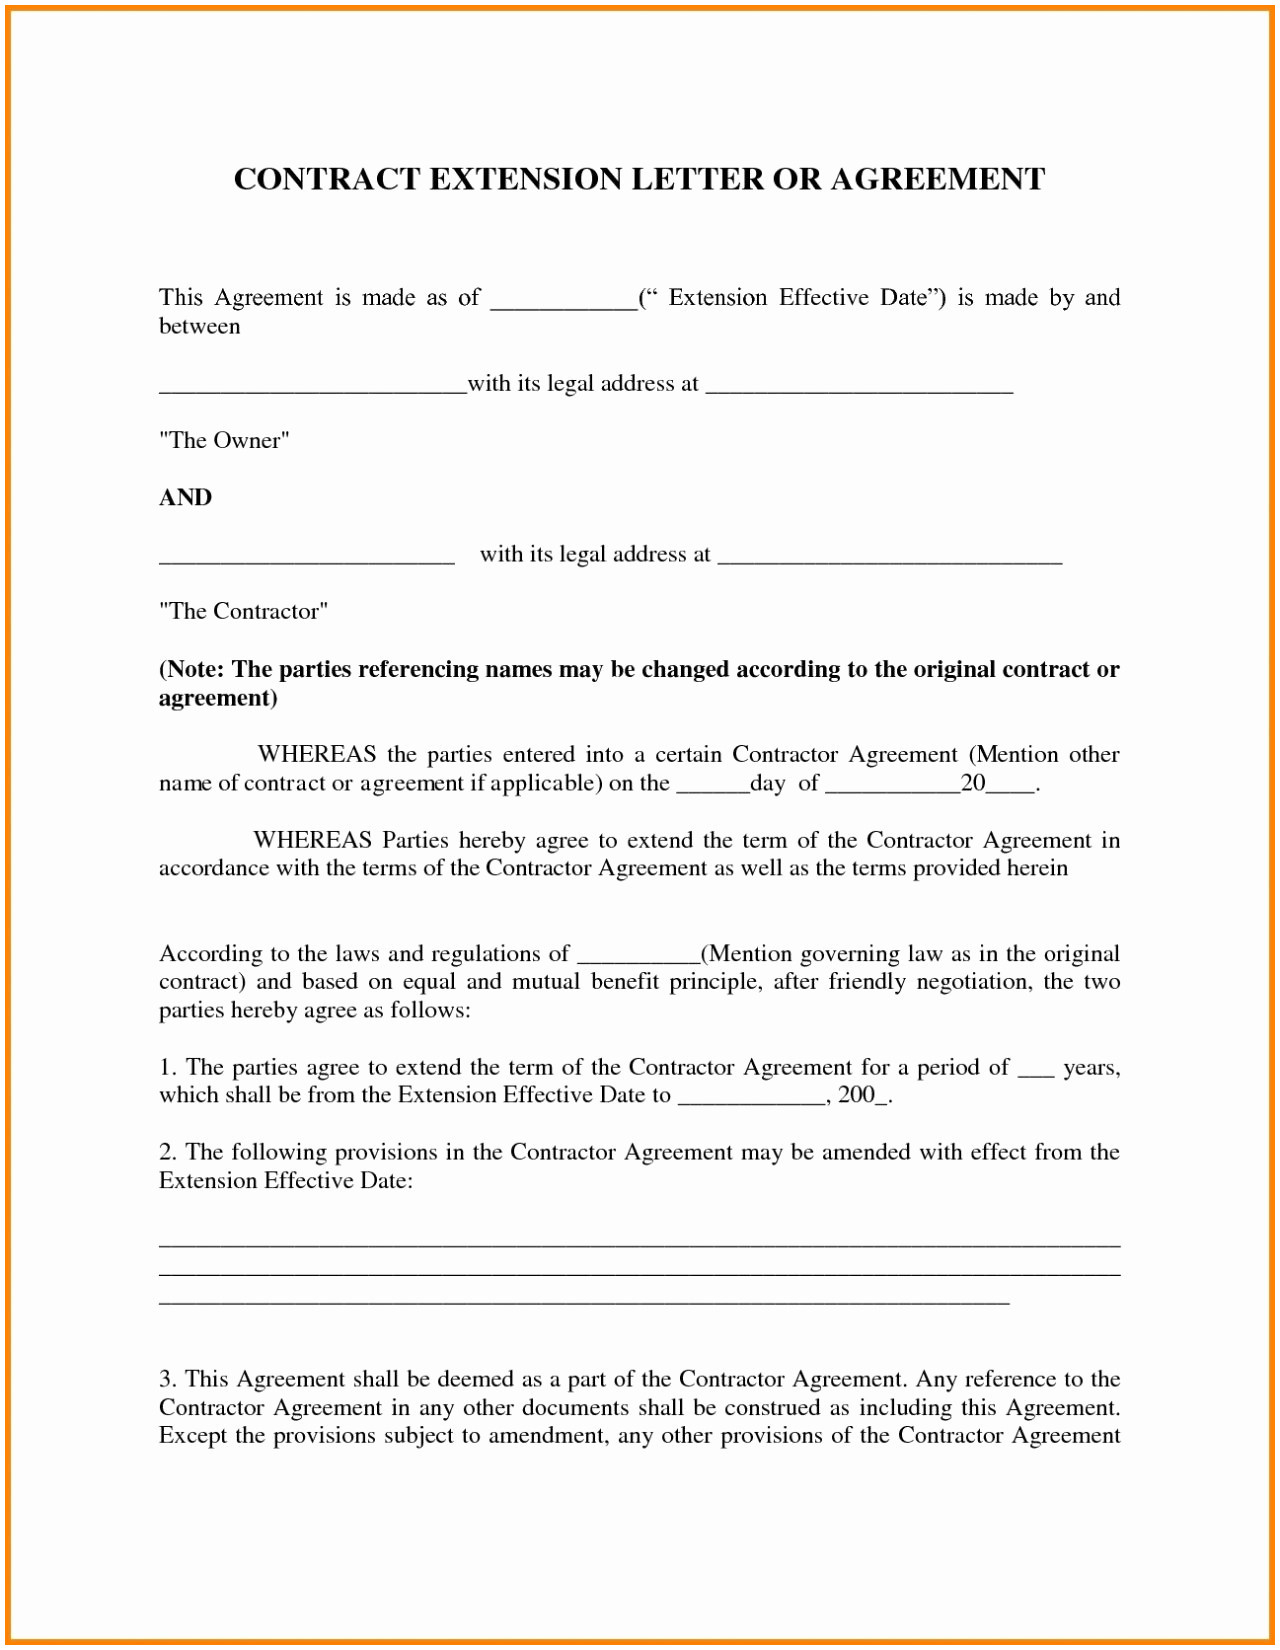 Sample Child Support Agreement 013 Template Ideas Sample Child Support Letter Examples